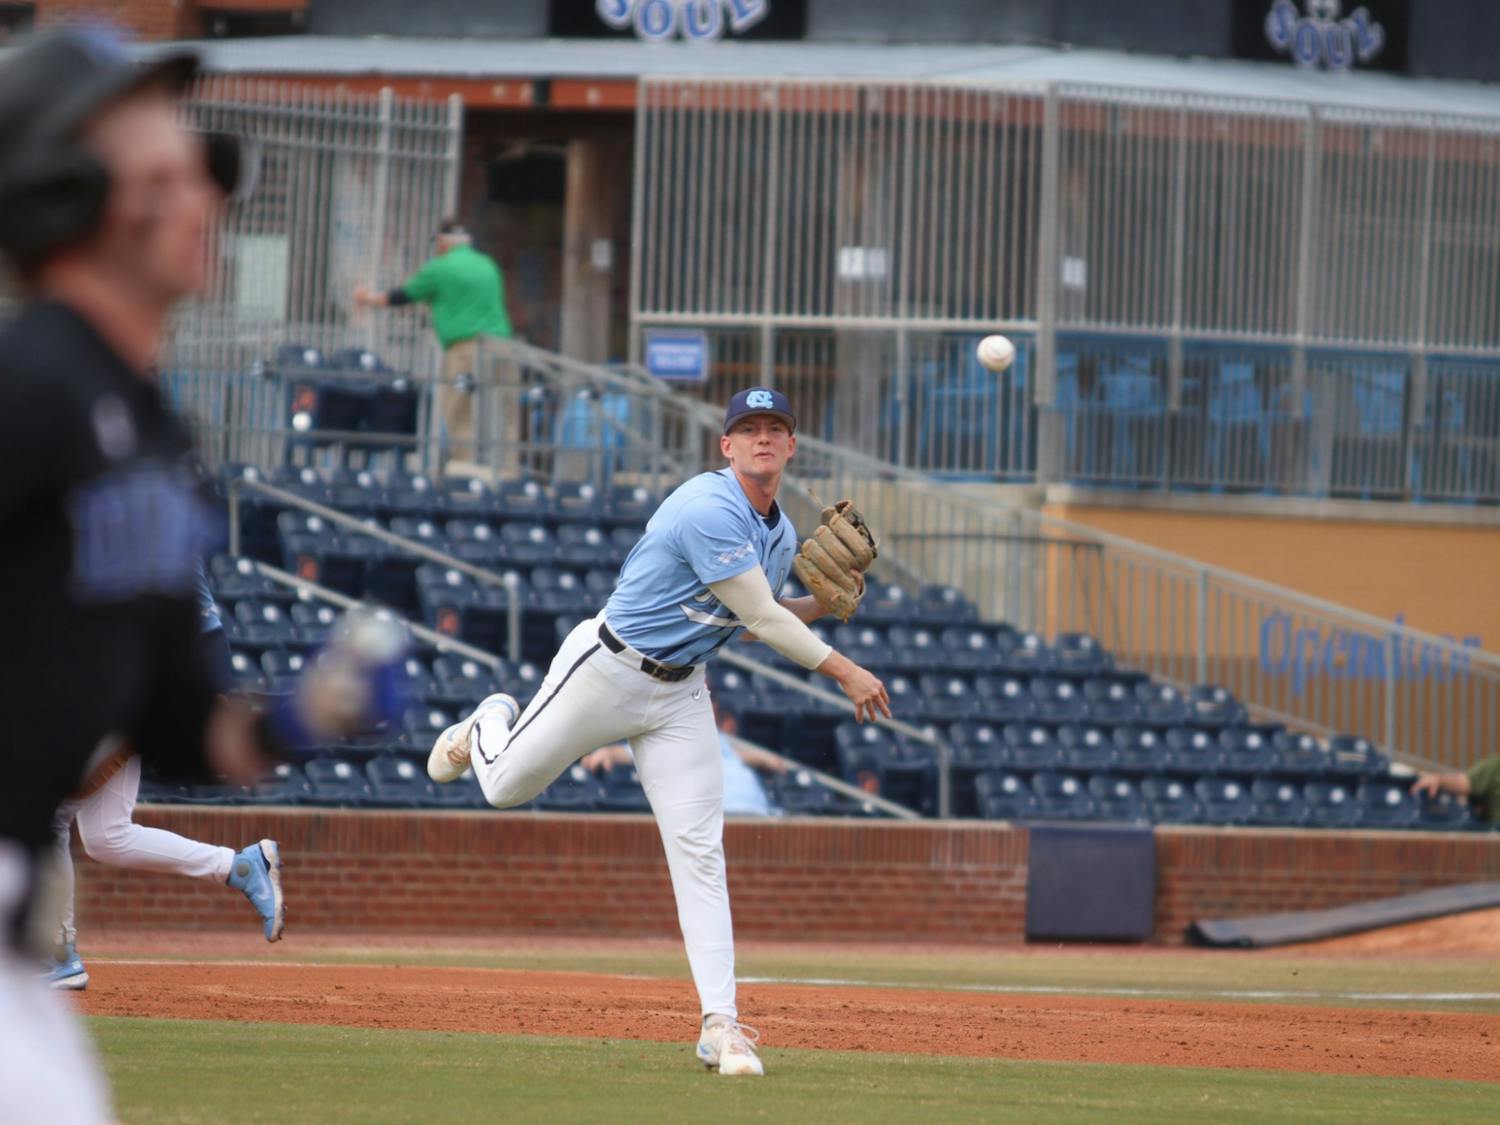 Infielder Mac Horvath (10) passes the ball to first base as a Duke player runs towards it. The Heels beat Duke 10-5 away on Friday, March 18, 2022.